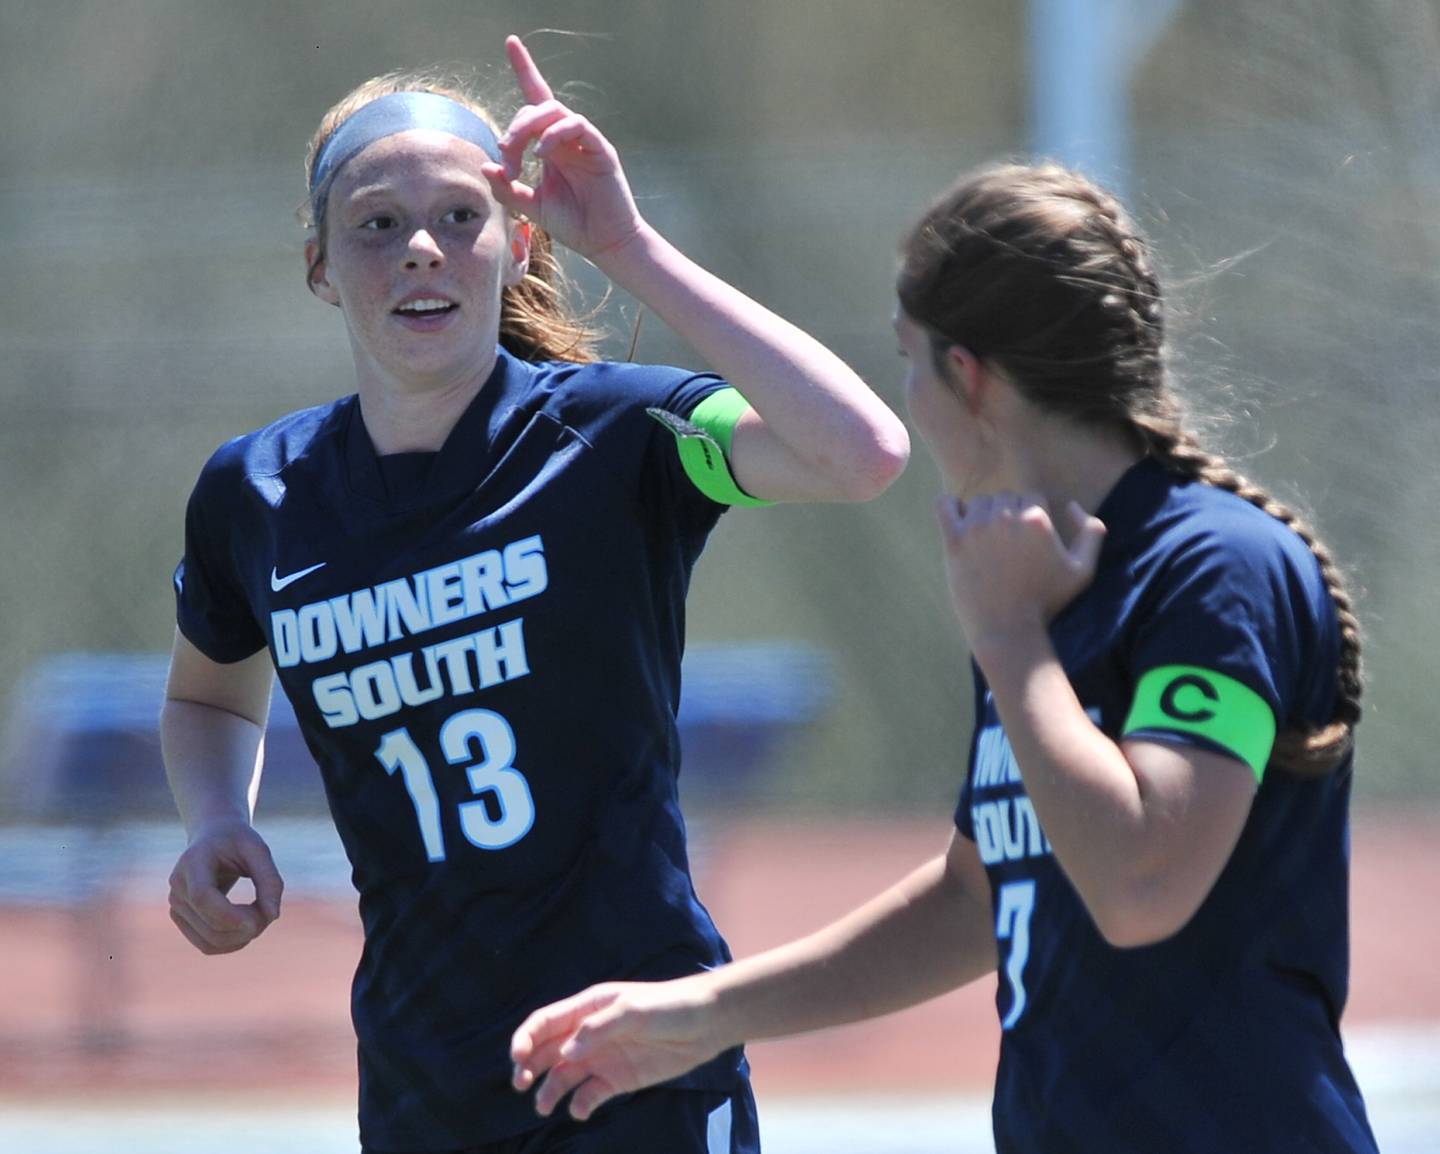 Downers Grove South's Emily Petring (13) signals to the crowd after scoring the first goal of the game against Downers Grove North on May. 7, 2022 at Downers Grove South High School.